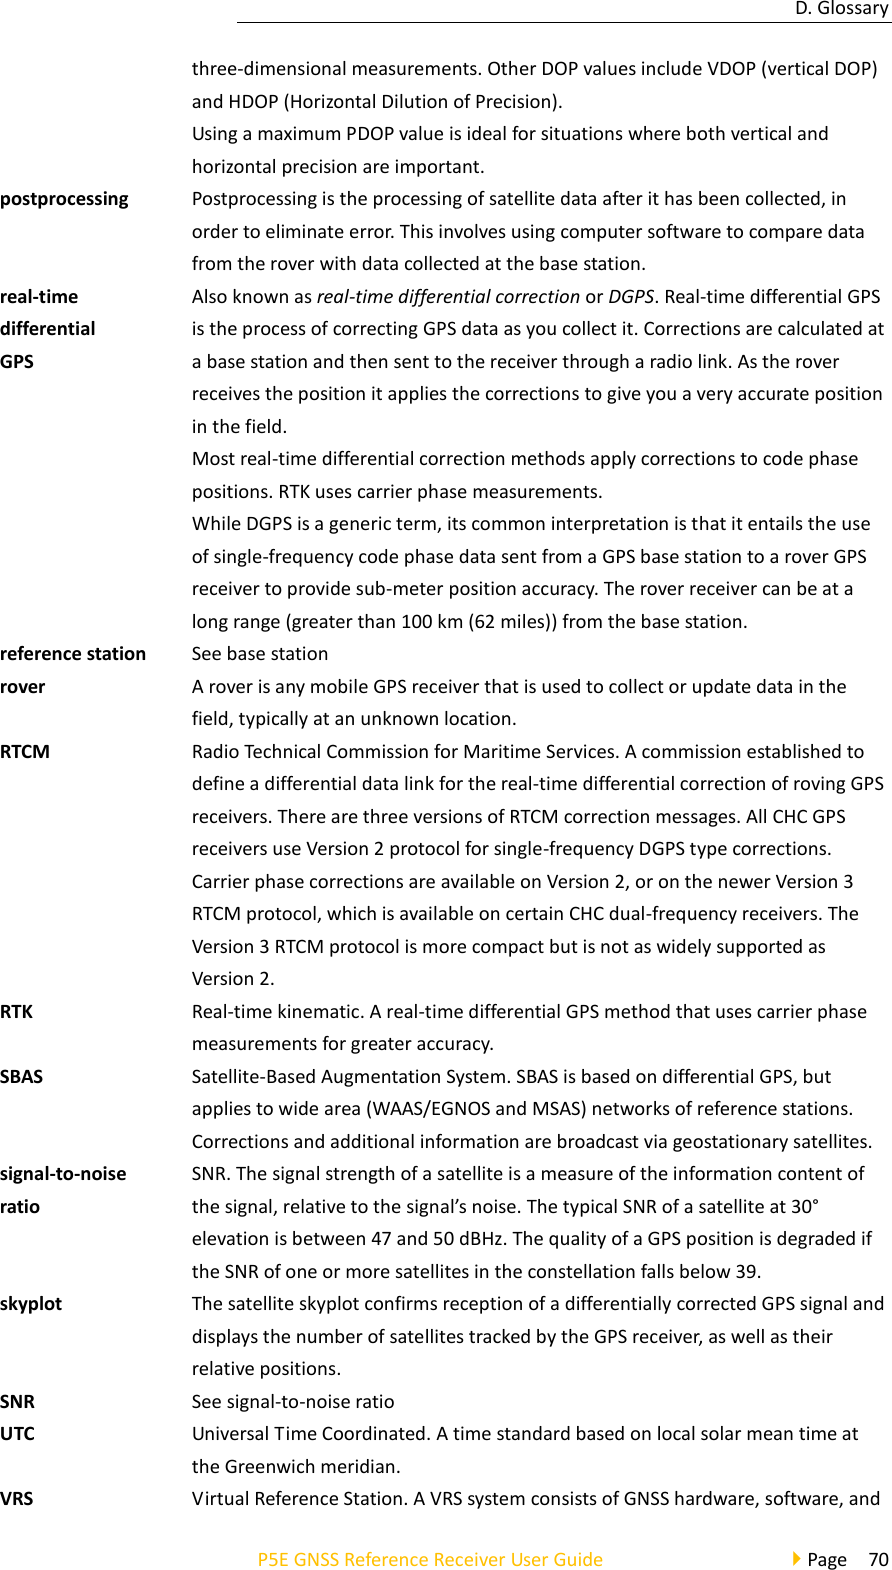 D. Glossary P5E GNSS Reference Receiver User Guide                                     Page  70 three-dimensional measurements. Other DOP values include VDOP (vertical DOP) and HDOP (Horizontal Dilution of Precision). Using a maximum PDOP value is ideal for situations where both vertical and horizontal precision are important. postprocessing Postprocessing is the processing of satellite data after it has been collected, in order to eliminate error. This involves using computer software to compare data from the rover with data collected at the base station. real-time differential GPS Also known as real-time differential correction or DGPS. Real-time differential GPS is the process of correcting GPS data as you collect it. Corrections are calculated at a base station and then sent to the receiver through a radio link. As the rover receives the position it applies the corrections to give you a very accurate position in the field. Most real-time differential correction methods apply corrections to code phase positions. RTK uses carrier phase measurements. While DGPS is a generic term, its common interpretation is that it entails the use of single-frequency code phase data sent from a GPS base station to a rover GPS receiver to provide sub-meter position accuracy. The rover receiver can be at a long range (greater than 100 km (62 miles)) from the base station. reference station See base station rover A rover is any mobile GPS receiver that is used to collect or update data in the field, typically at an unknown location. RTCM Radio Technical Commission for Maritime Services. A commission established to define a differential data link for the real-time differential correction of roving GPS receivers. There are three versions of RTCM correction messages. All CHC GPS receivers use Version 2 protocol for single-frequency DGPS type corrections. Carrier phase corrections are available on Version 2, or on the newer Version 3 RTCM protocol, which is available on certain CHC dual-frequency receivers. The Version 3 RTCM protocol is more compact but is not as widely supported as Version 2. RTK Real-time kinematic. A real-time differential GPS method that uses carrier phase measurements for greater accuracy. SBAS Satellite-Based Augmentation System. SBAS is based on differential GPS, but applies to wide area (WAAS/EGNOS and MSAS) networks of reference stations. Corrections and additional information are broadcast via geostationary satellites. signal-to-noise ratio SNR. The signal strength of a satellite is a measure of the information content of the signal, relative to the signal’s noise. The typical SNR of a satellite at 30° elevation is between 47 and 50 dBHz. The quality of a GPS position is degraded if the SNR of one or more satellites in the constellation falls below 39. skyplot The satellite skyplot confirms reception of a differentially corrected GPS signal and displays the number of satellites tracked by the GPS receiver, as well as their relative positions. SNR See signal-to-noise ratio UTC Universal Time Coordinated. A time standard based on local solar mean time at the Greenwich meridian. VRS Virtual Reference Station. A VRS system consists of GNSS hardware, software, and 